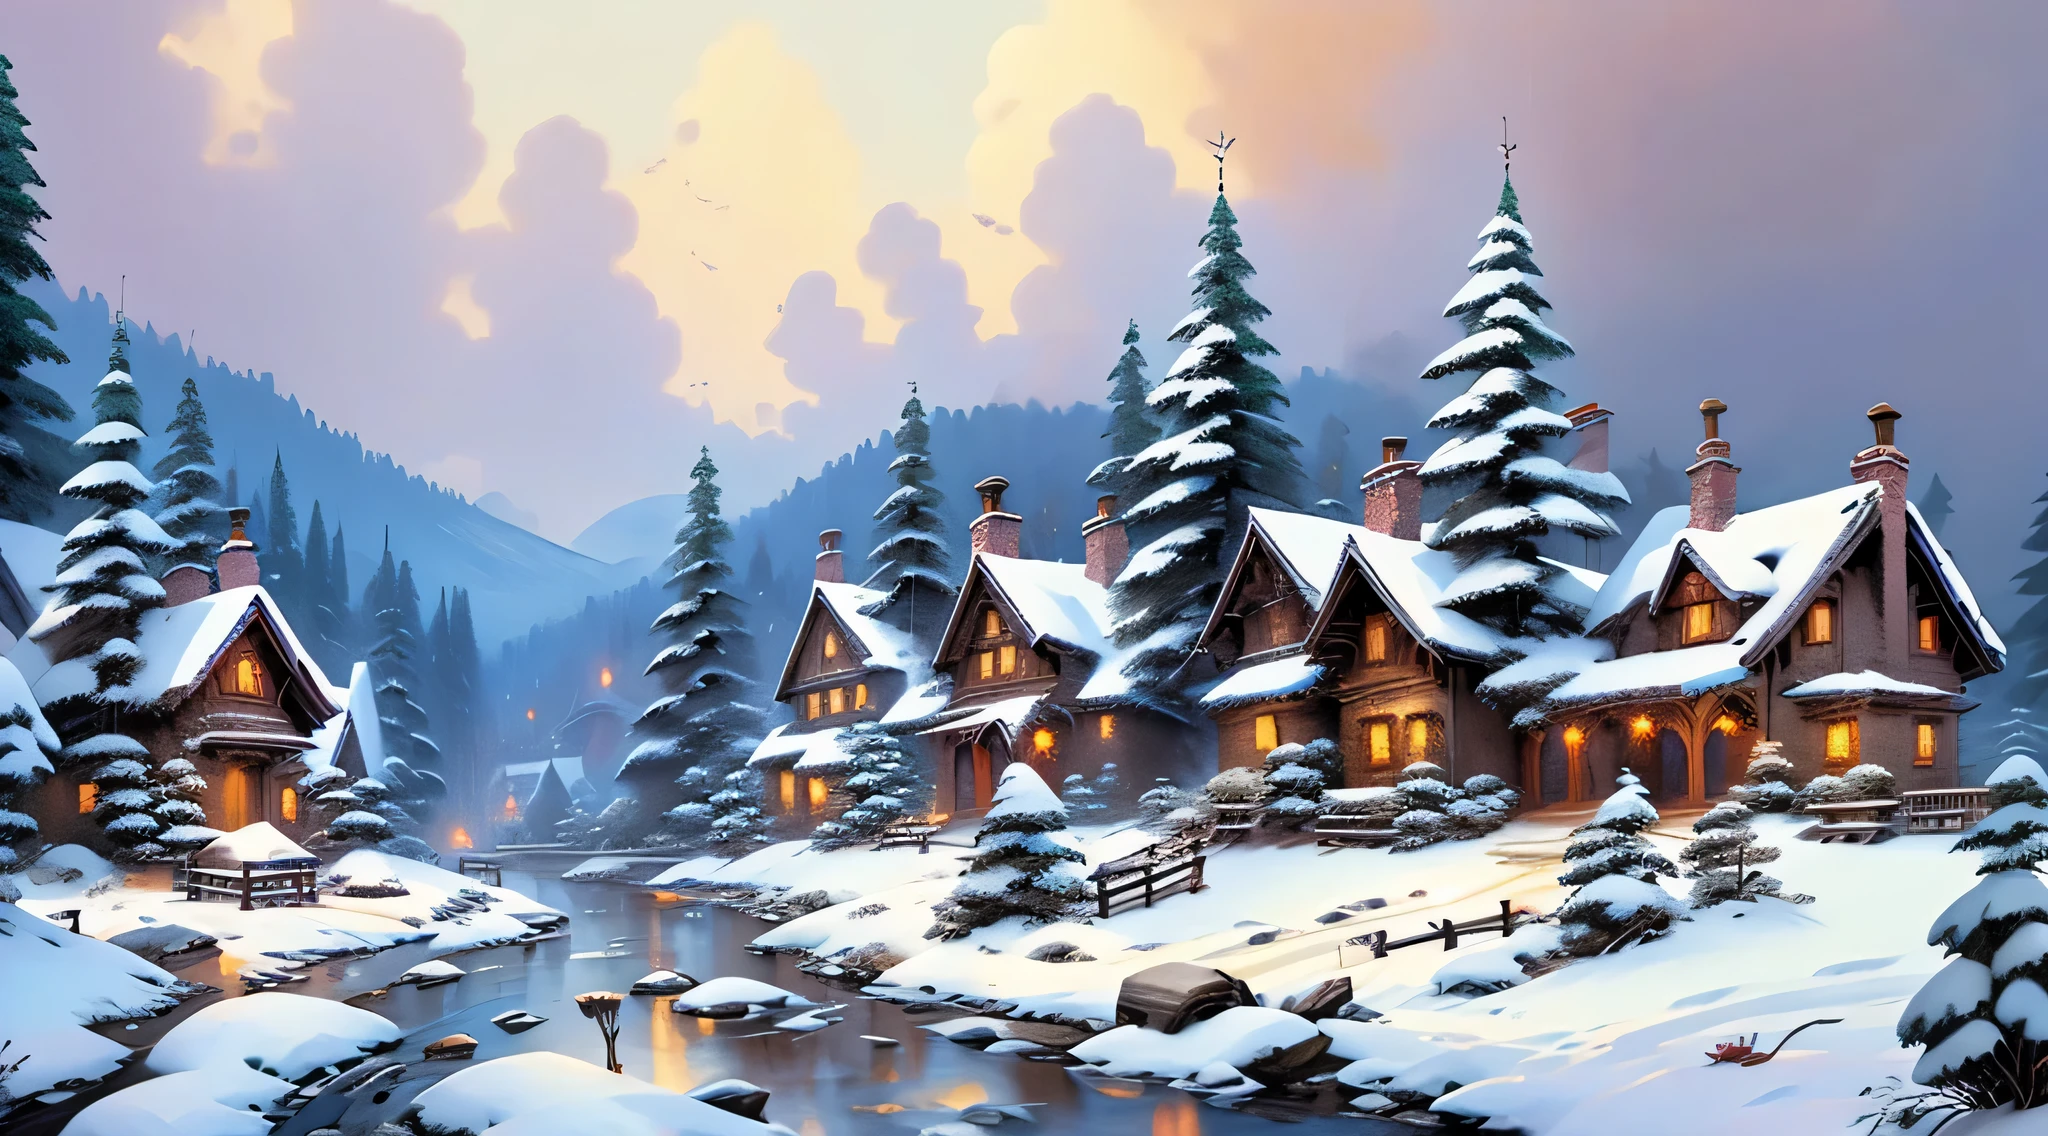 Snowy village, houses covered in snow, snow covered trees, High Quality, Elaborate depictions, Detailed expression